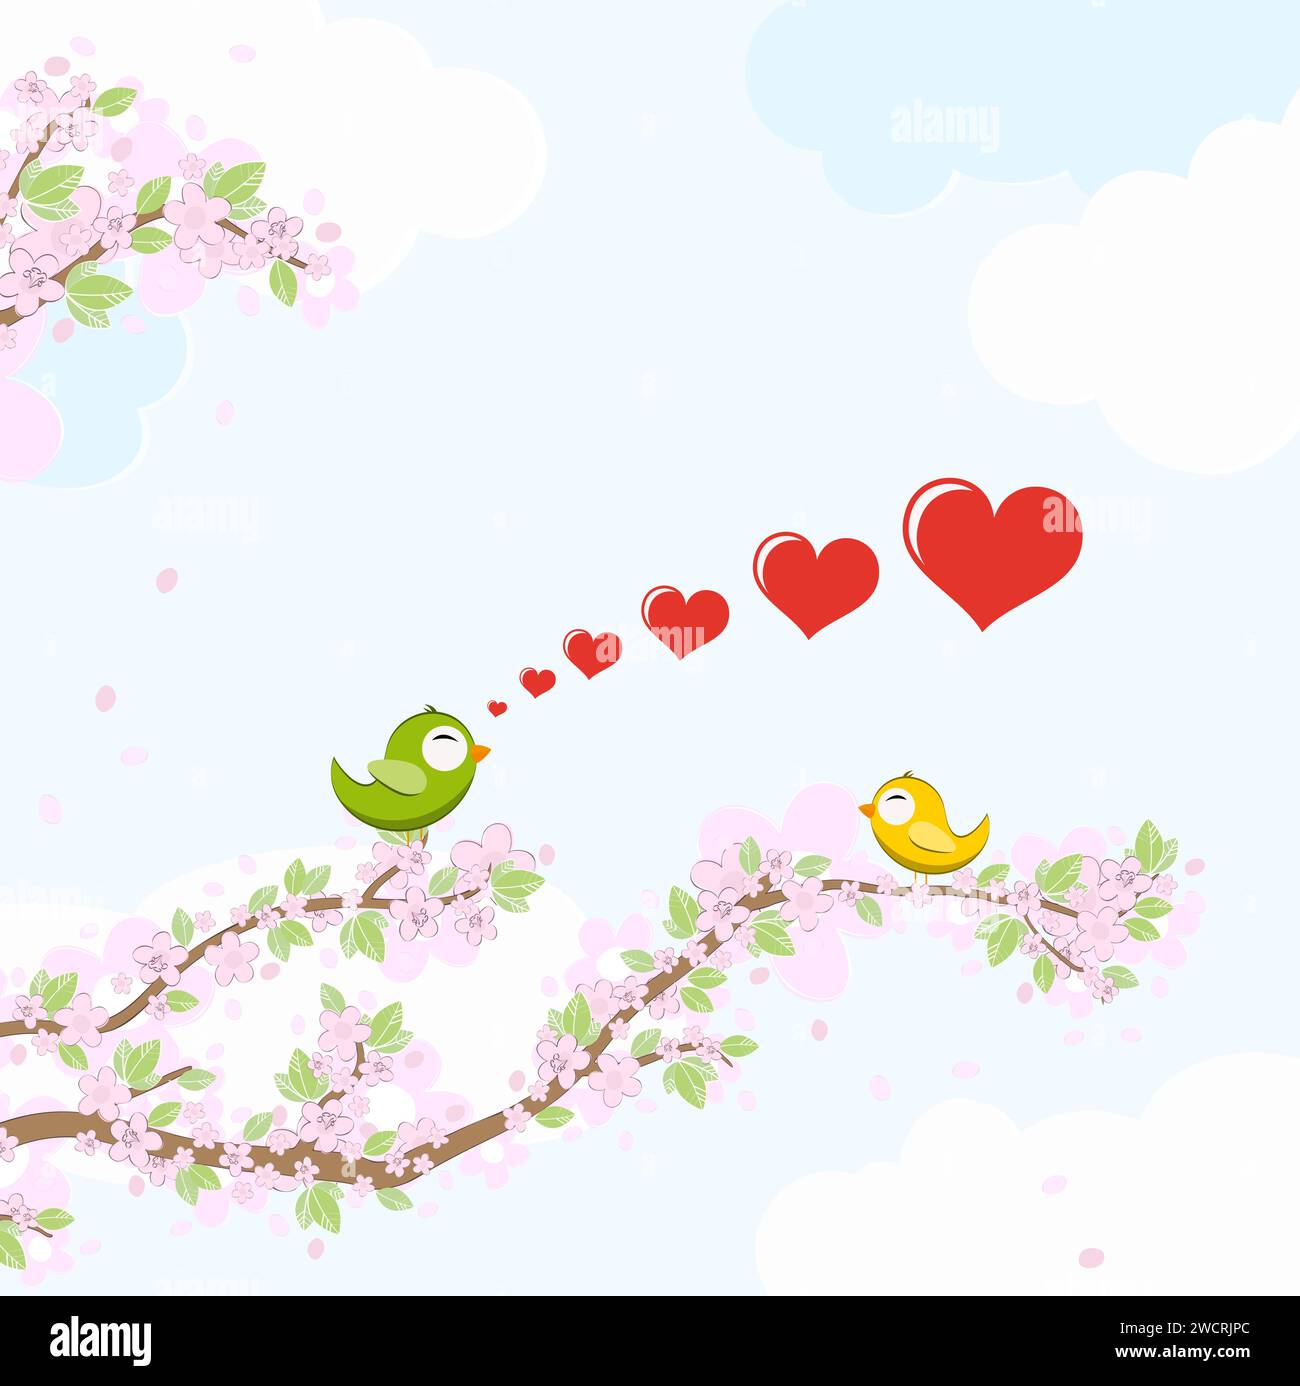 eps vector file with green and yellow colored birds in love, flying and sitting on branches with blossoms and green leaves in spring time, background Stock Vector